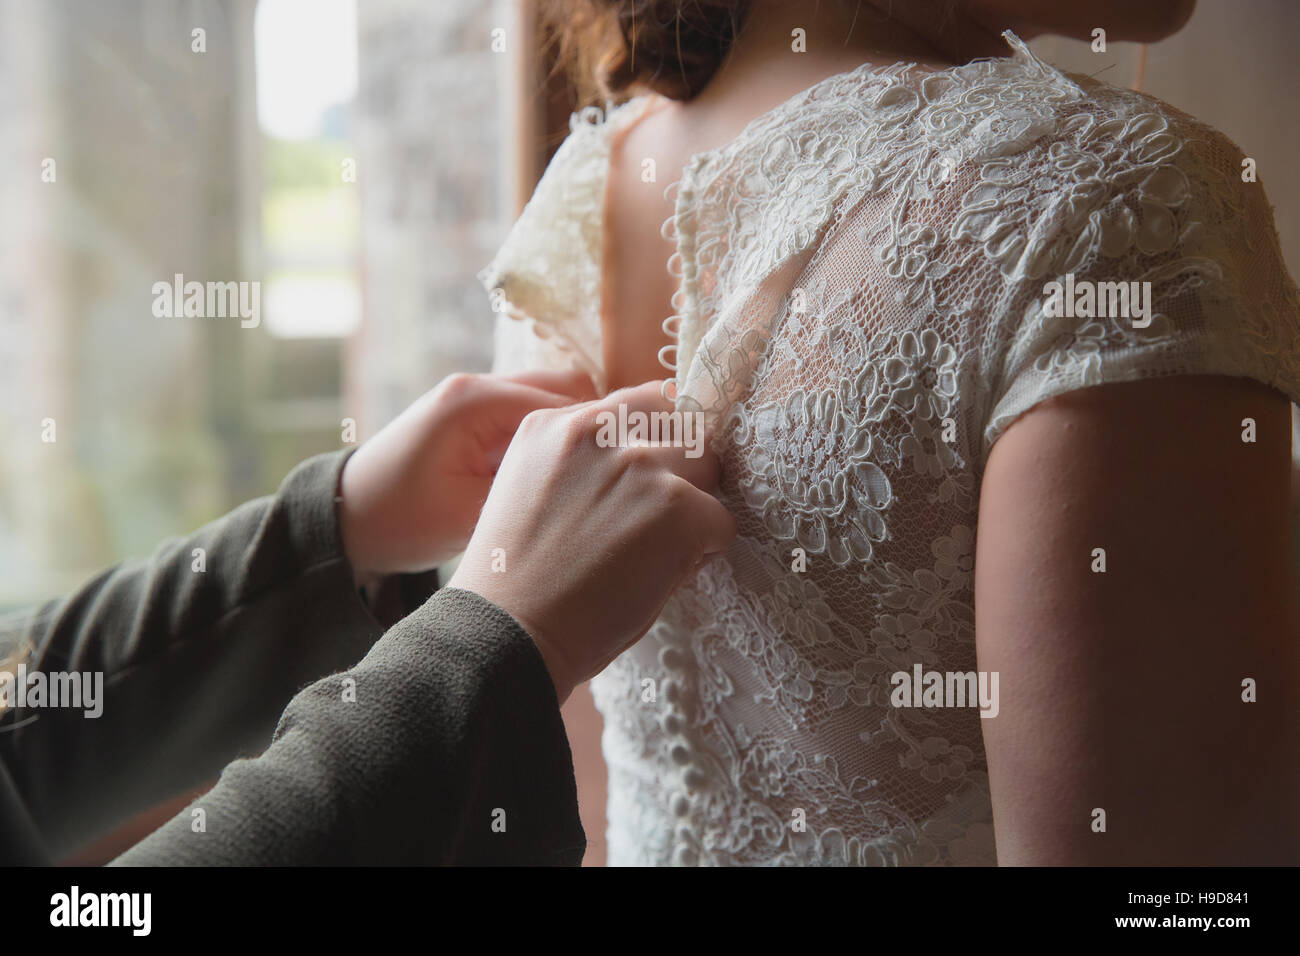 Hands carefully doing up buttons on a wedding gown Stock Photo